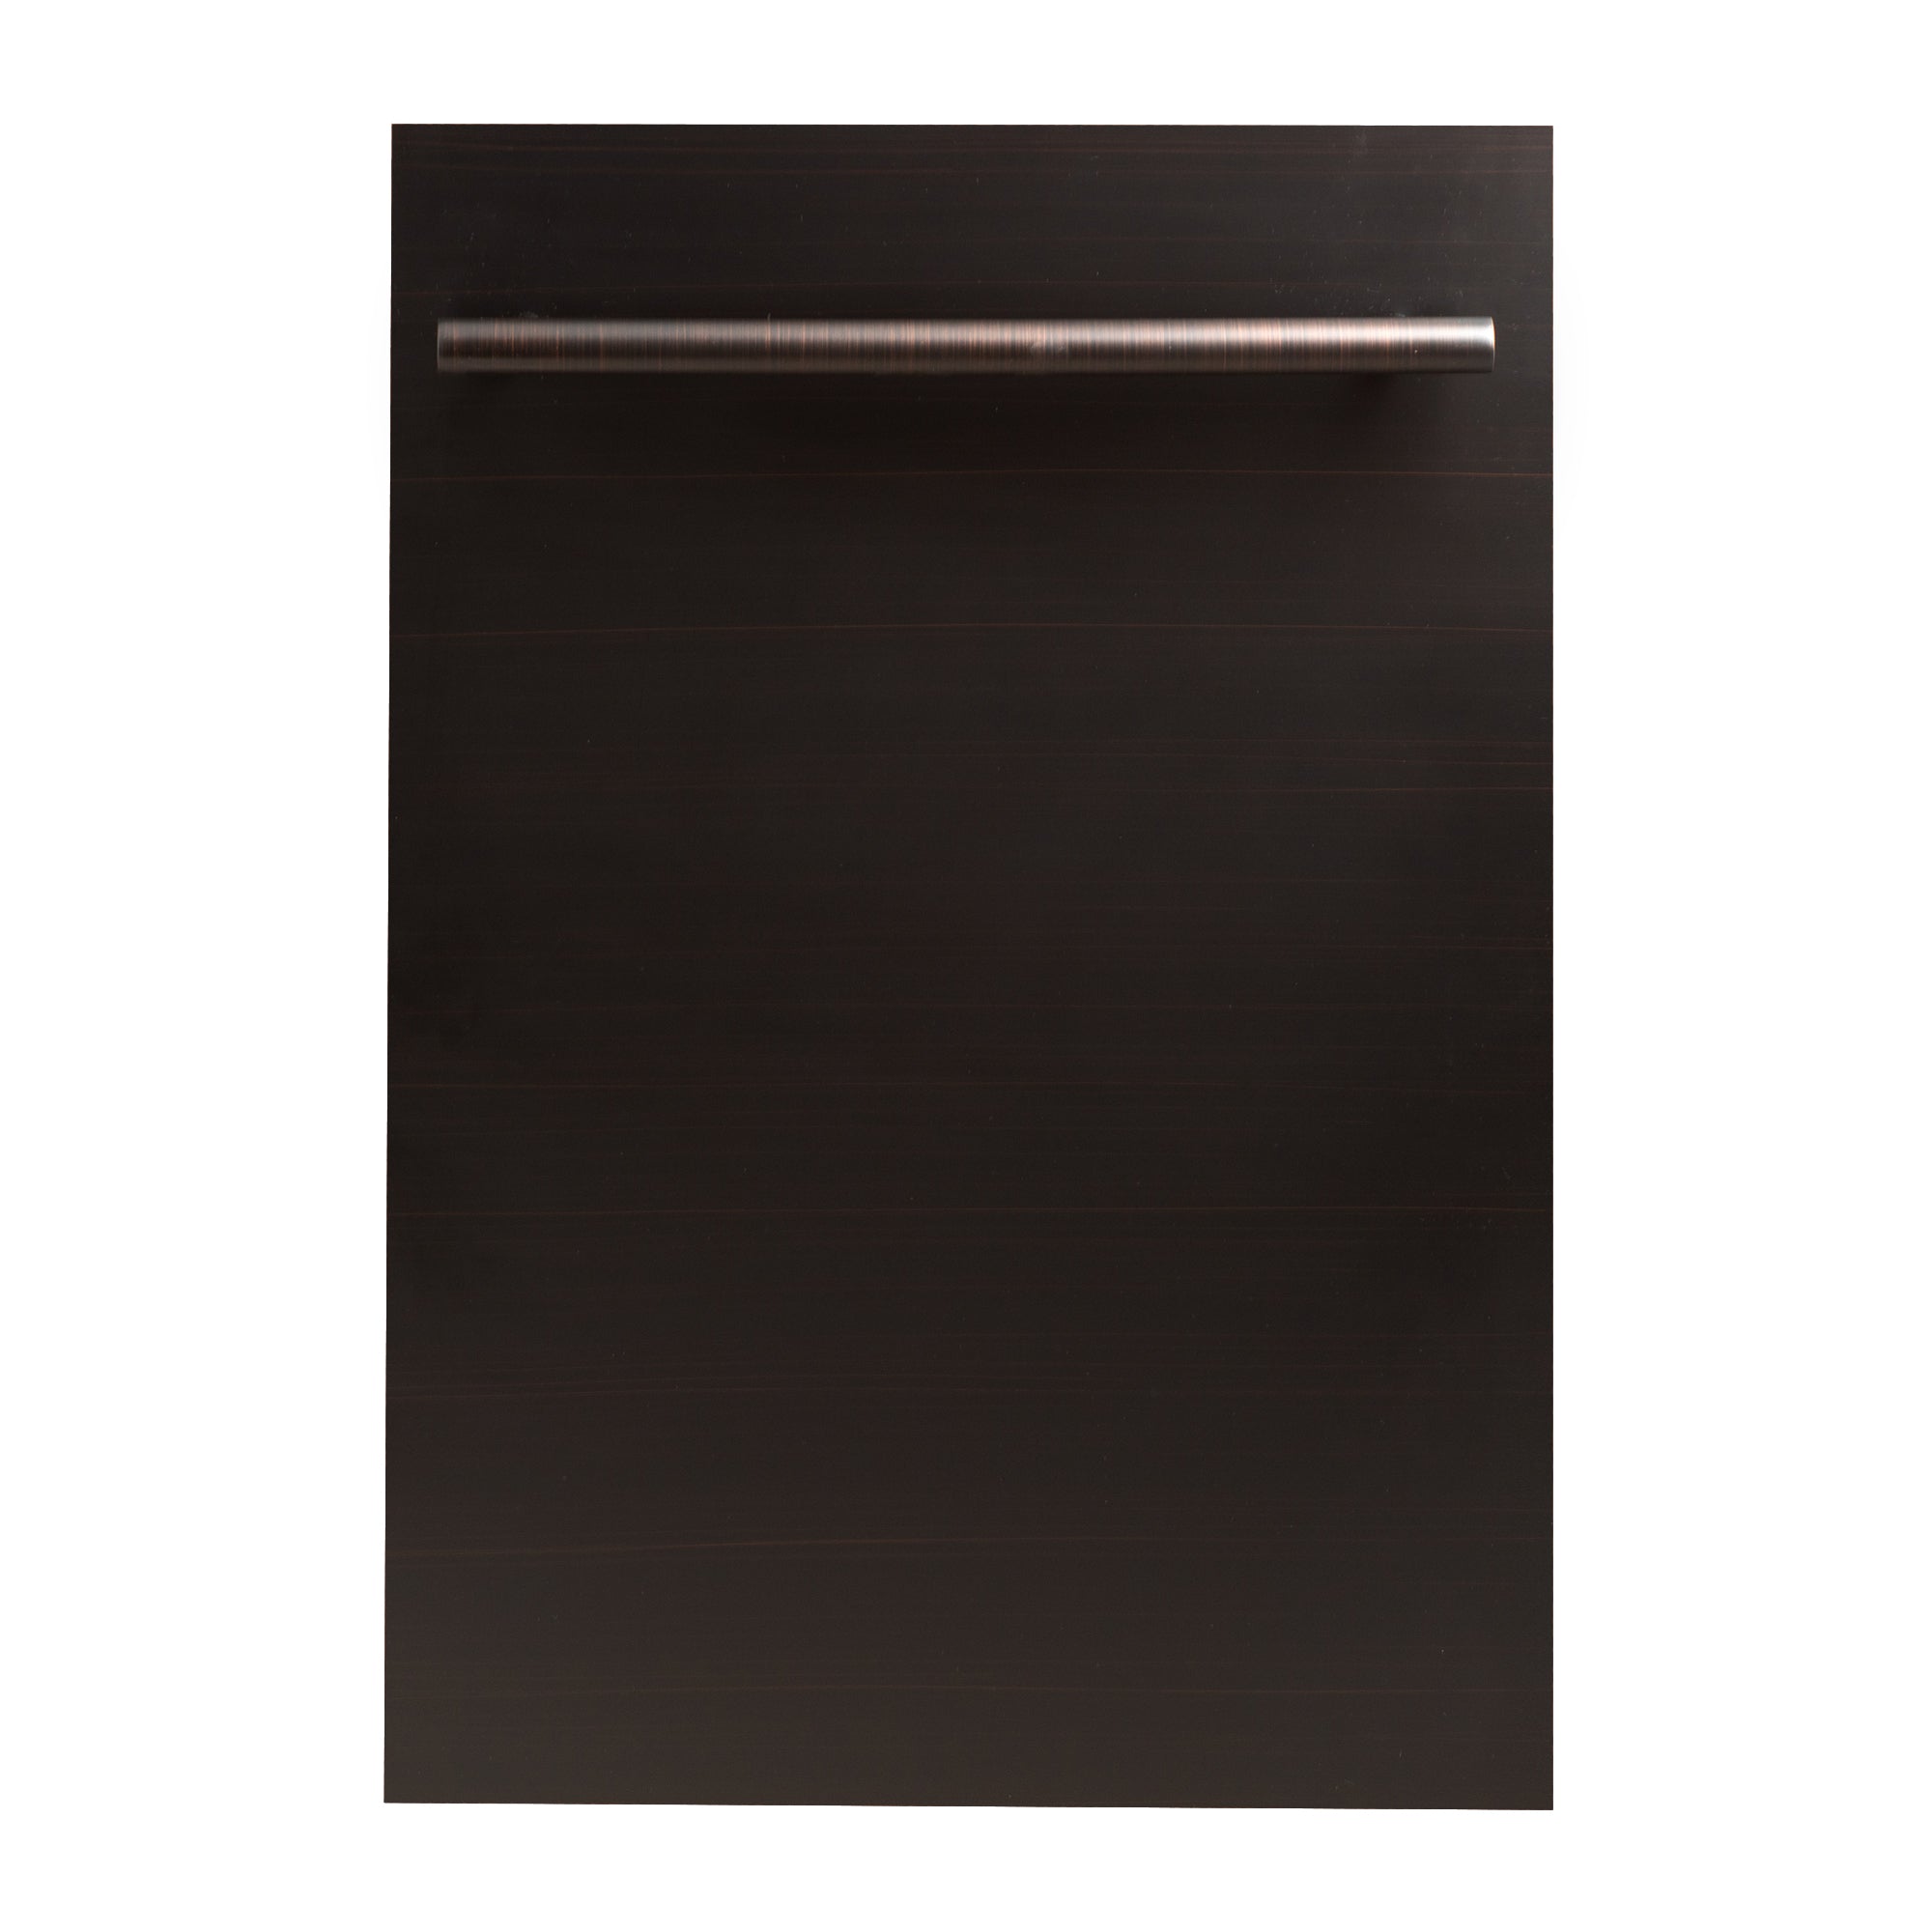 ZLINE 18" Dishwasher Panel in Oil Rubbed Bronze with Modern Handle (DP-ORB-18)